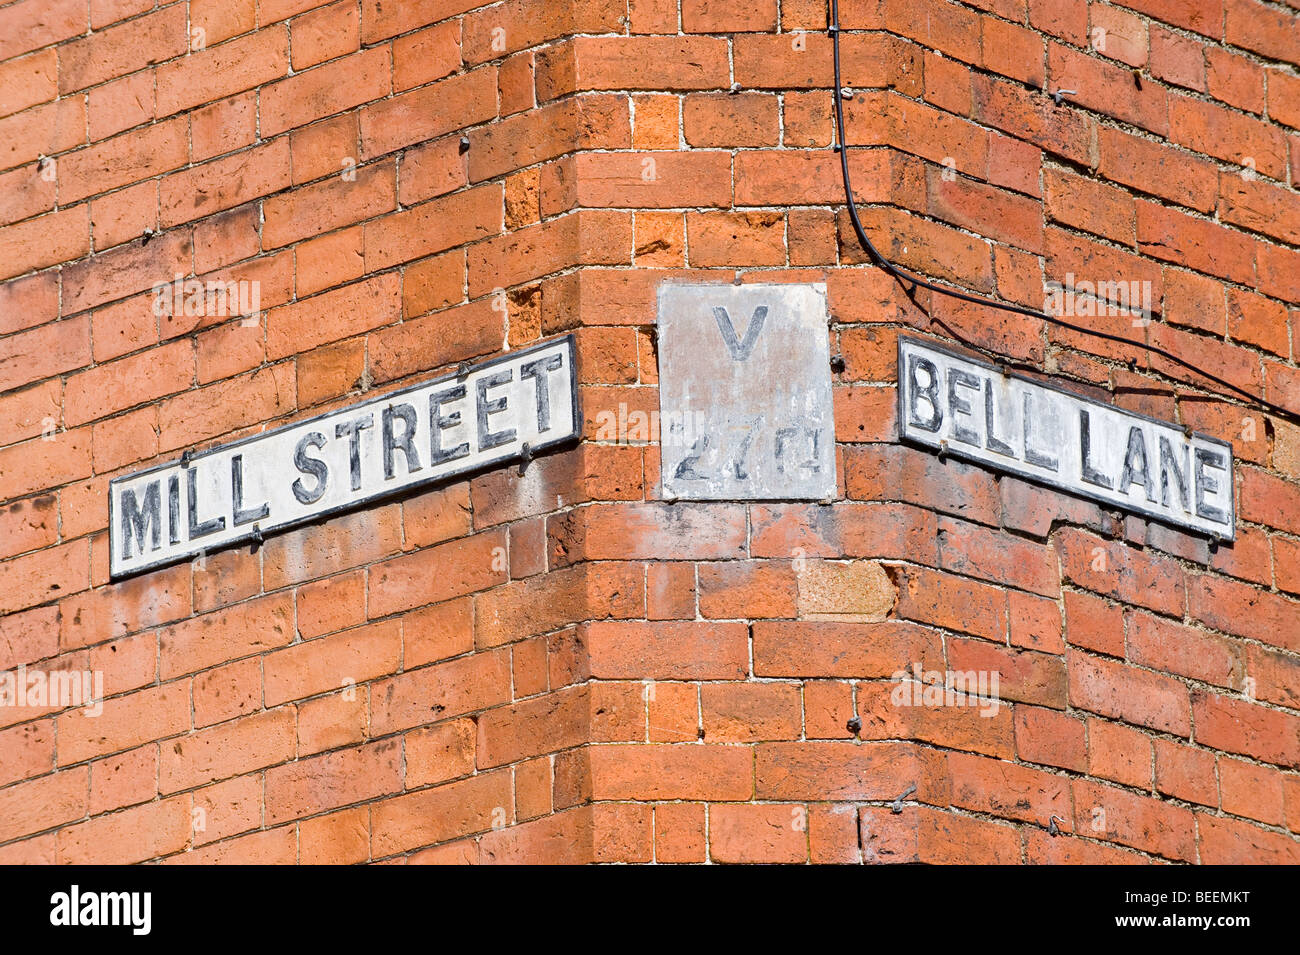 Street signs at corner of MILL STREET and BELL LANE in Ludlow Shropshire England UK Stock Photo